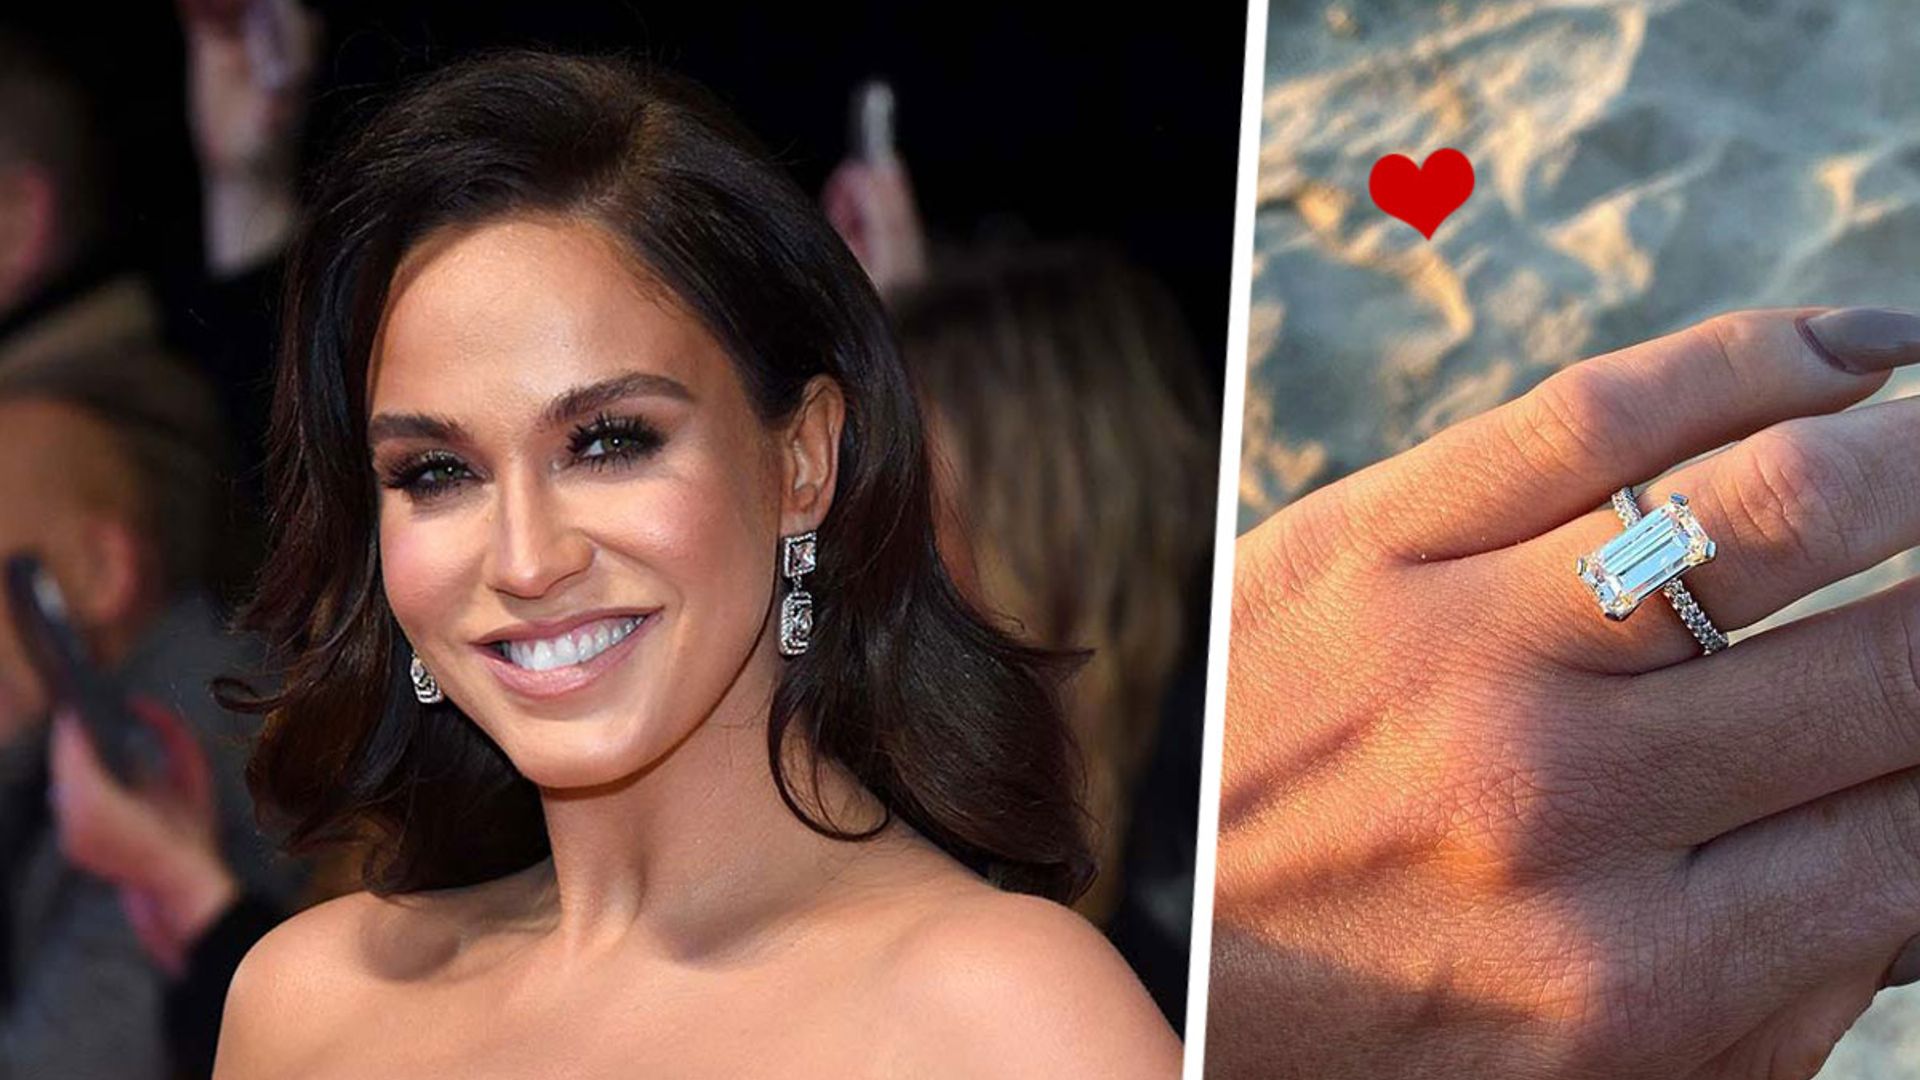 Vicky Pattison's sparkling engagement ring is nothing like ex's 'cursed' rock